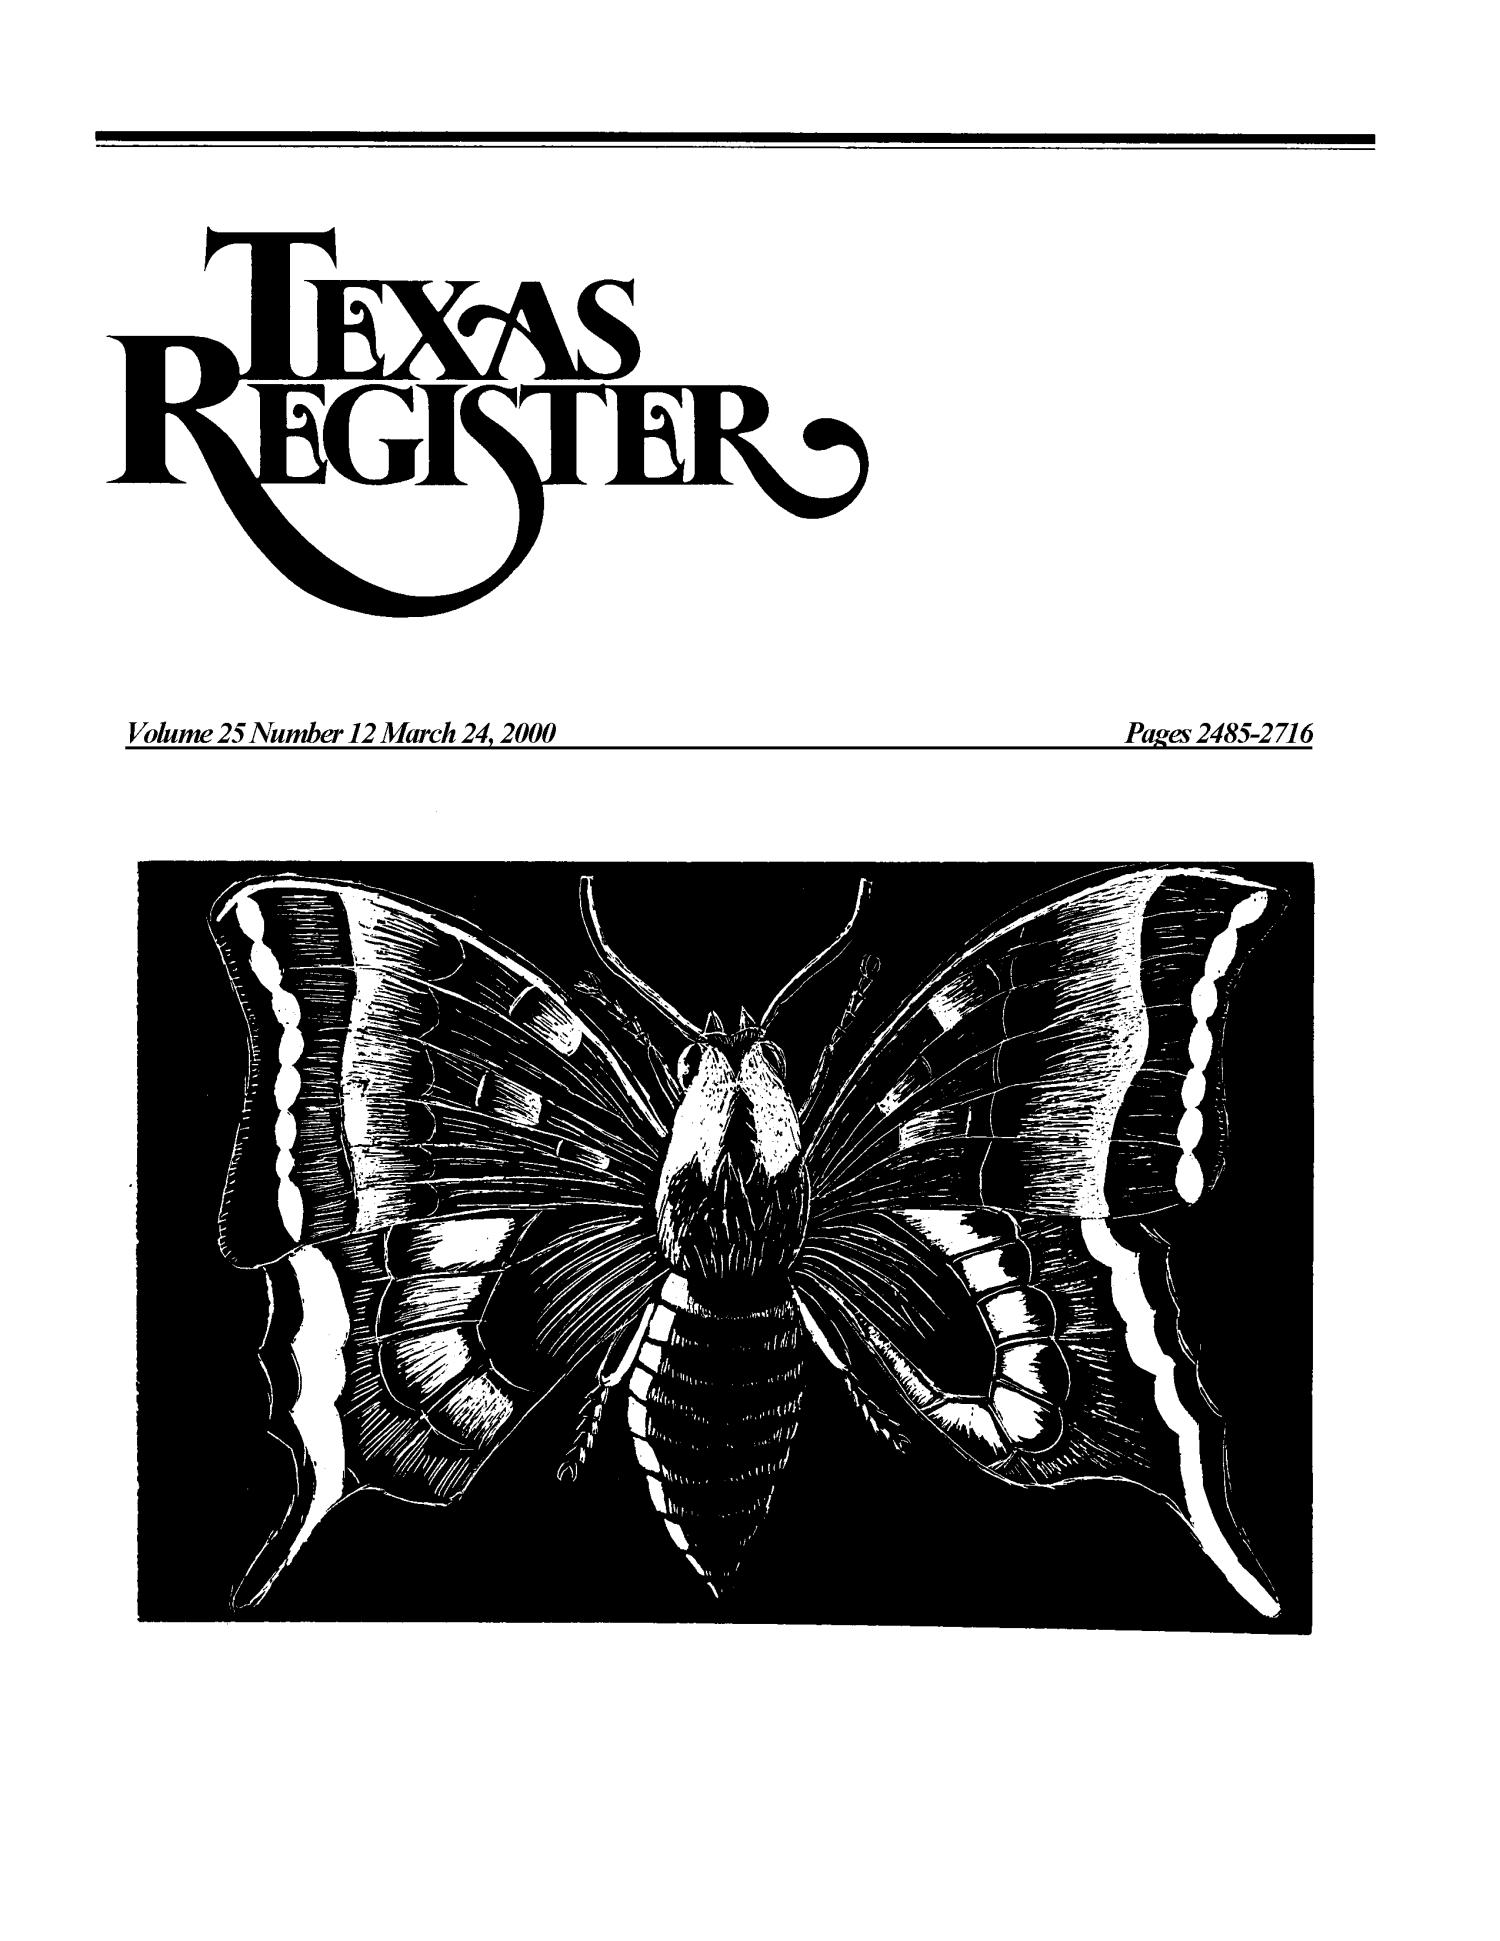 Texas Register, Volume 25, Number 12, Pages 2485-2716, March 24, 2000
                                                
                                                    2485
                                                